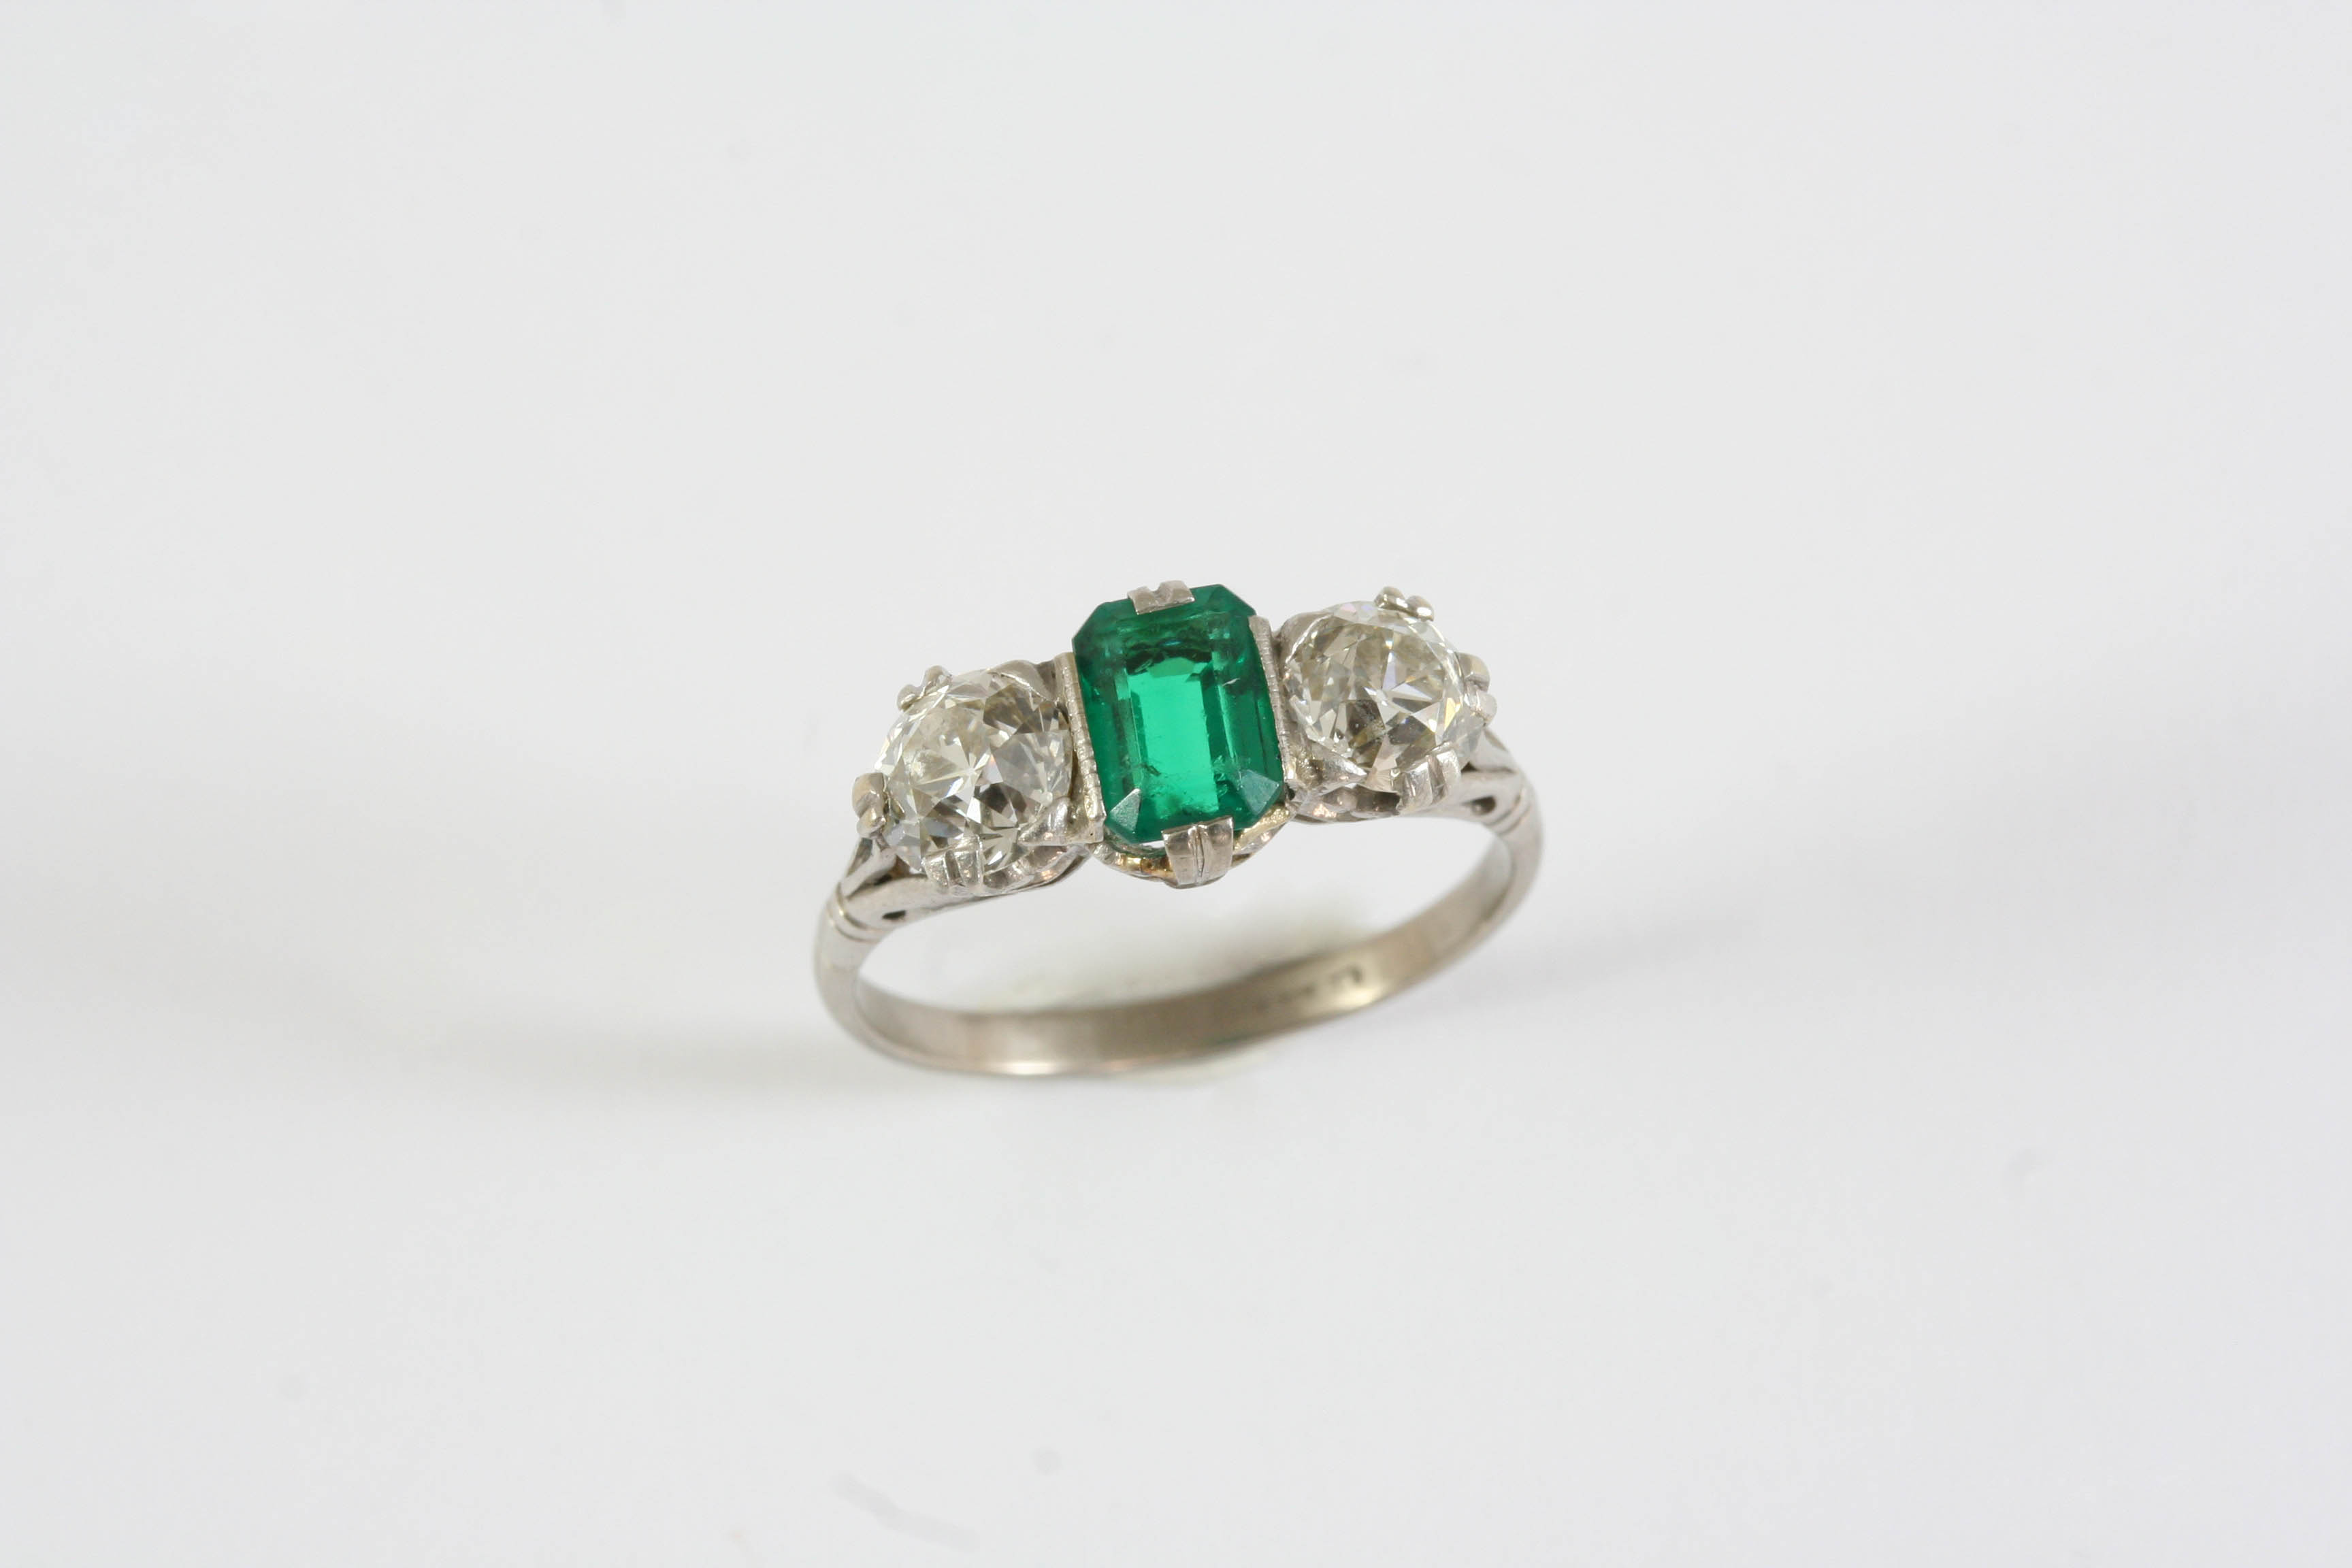 AN EMERALD AND DIAMOND THREE STONE RING the rectangular-shaped emerald is set with two old cushion-